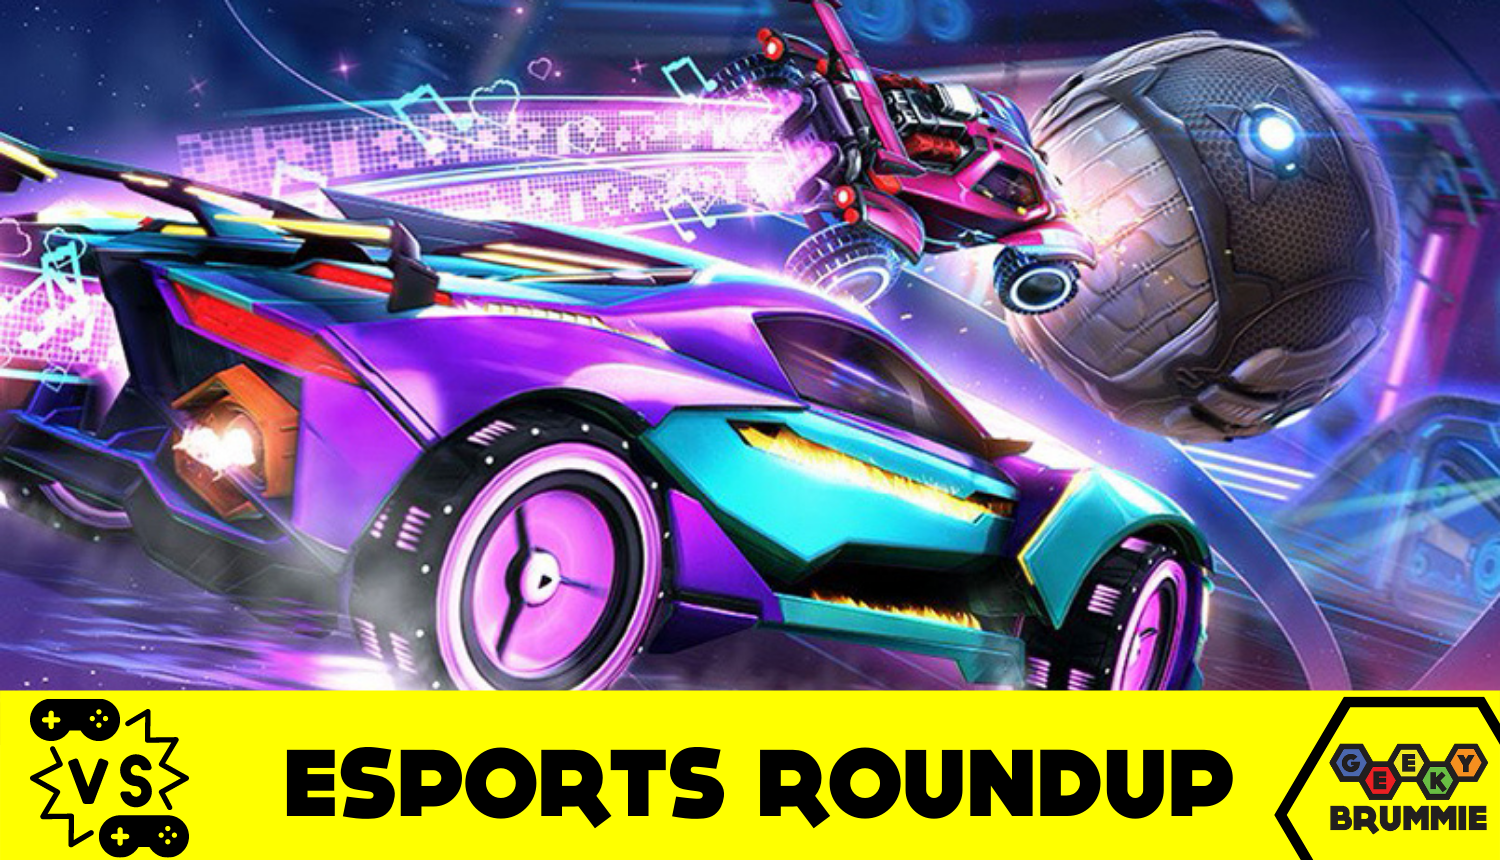 Esports Roundup – Play Games, Win Prizes